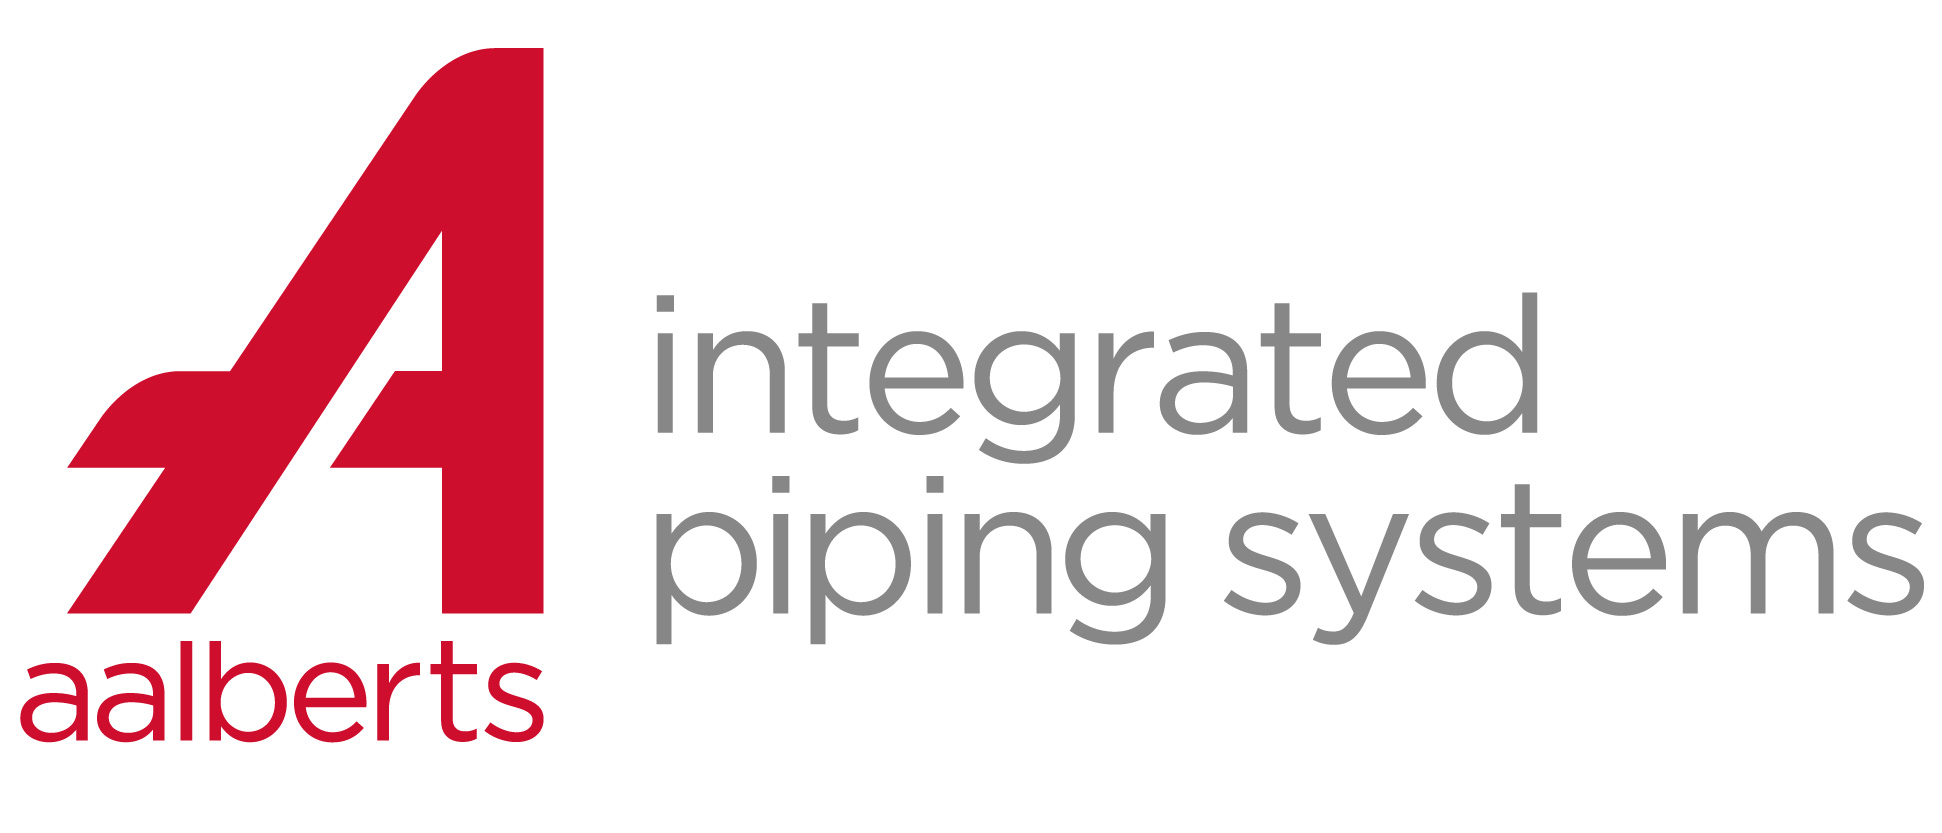 Aalberts integrated piping systems ltd (Formerly Pegler)